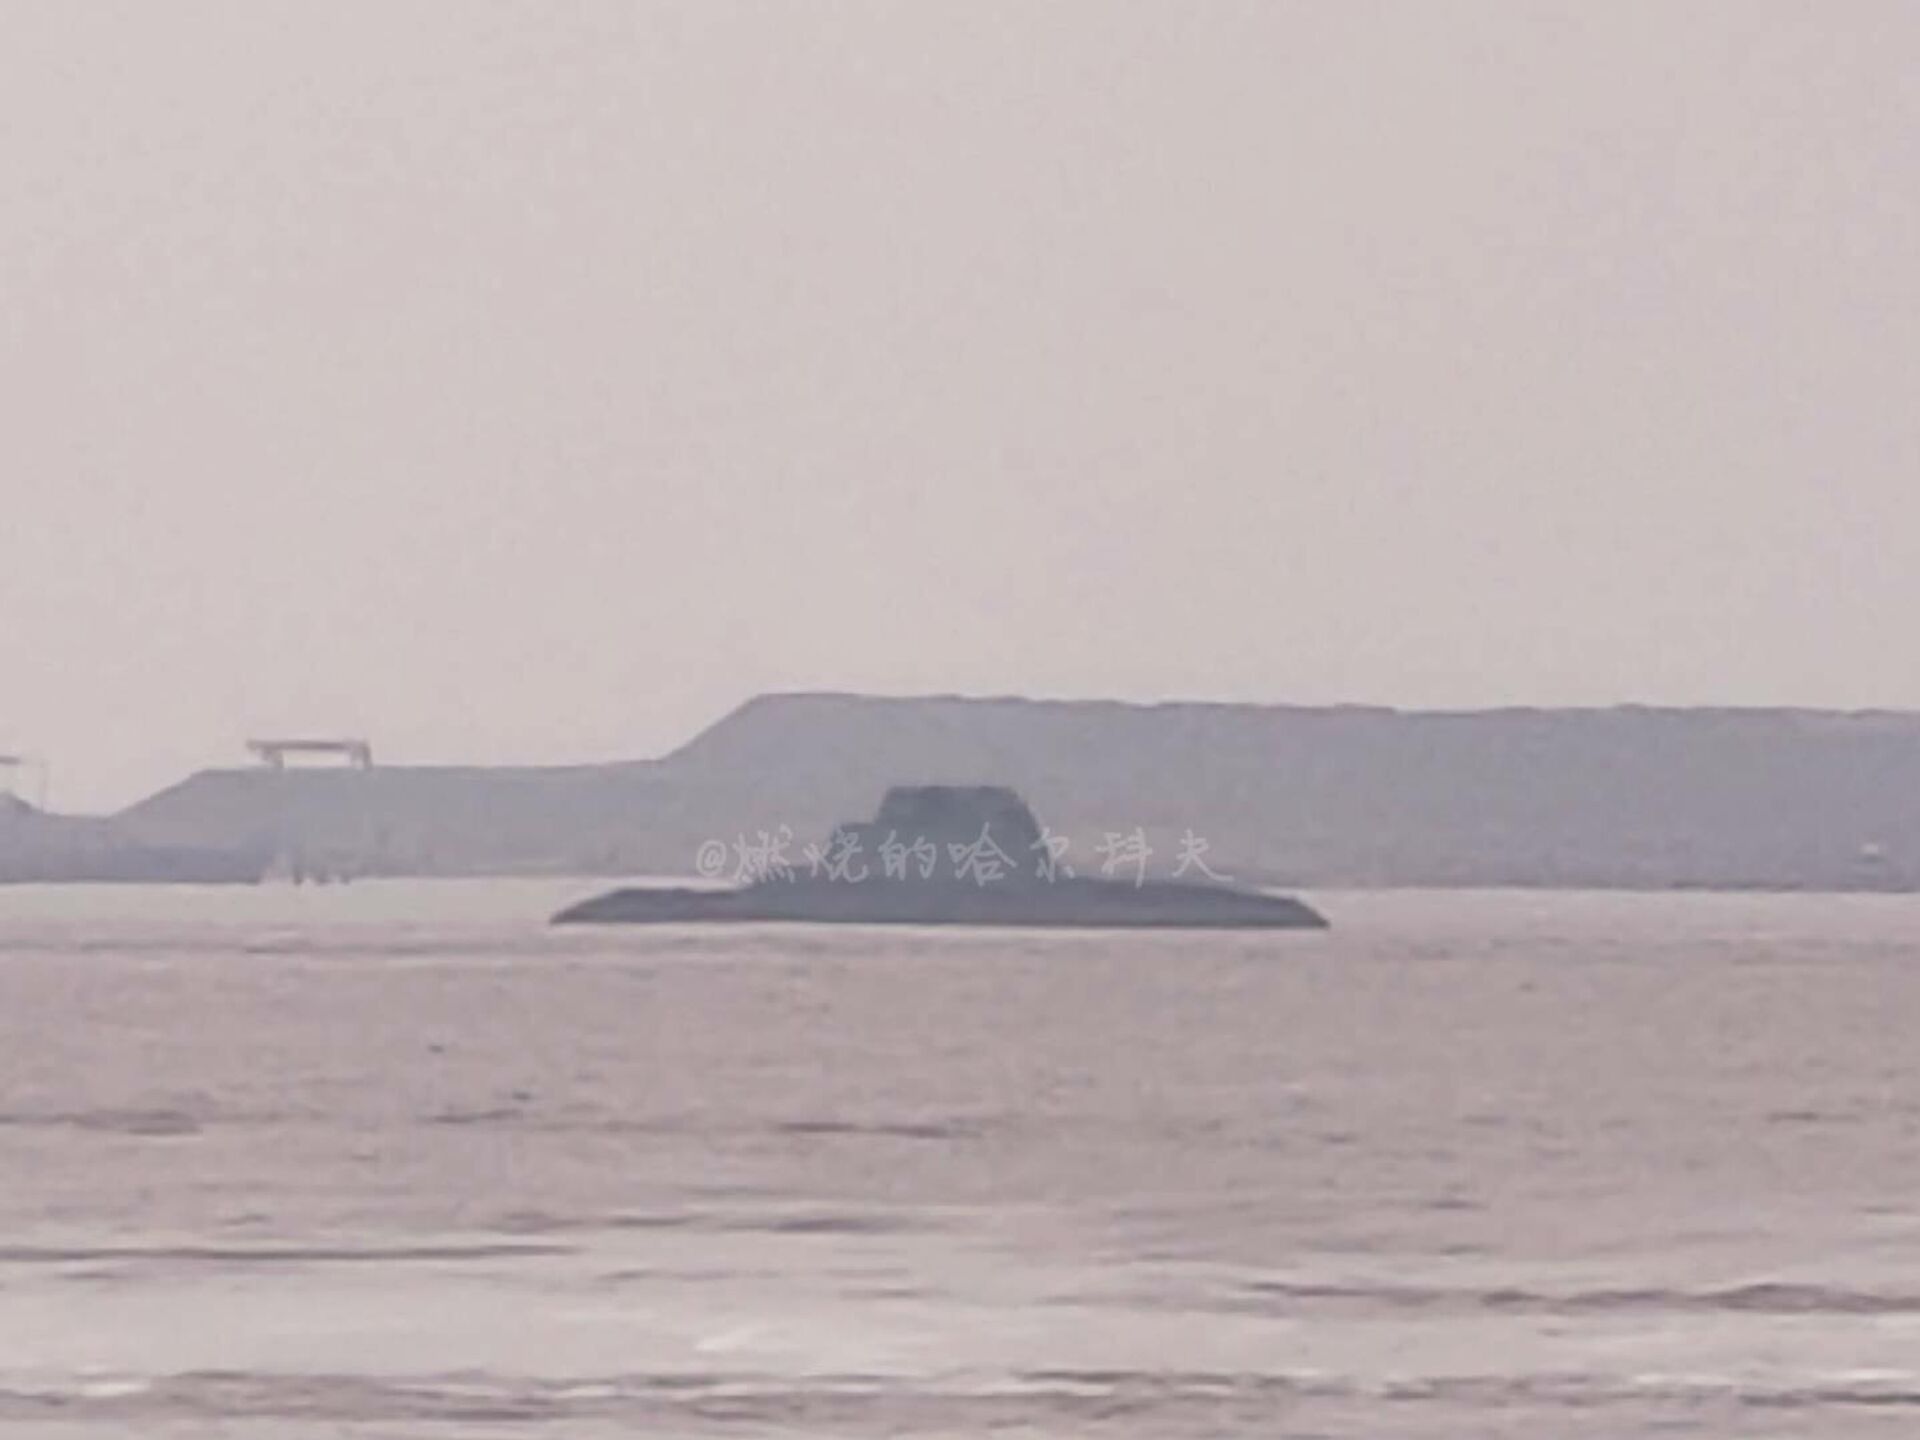 Purported image of a Chinese stealth vessel that appeared on Sina Weibo in February 2022 - Sputnik International, 1920, 17.02.2022